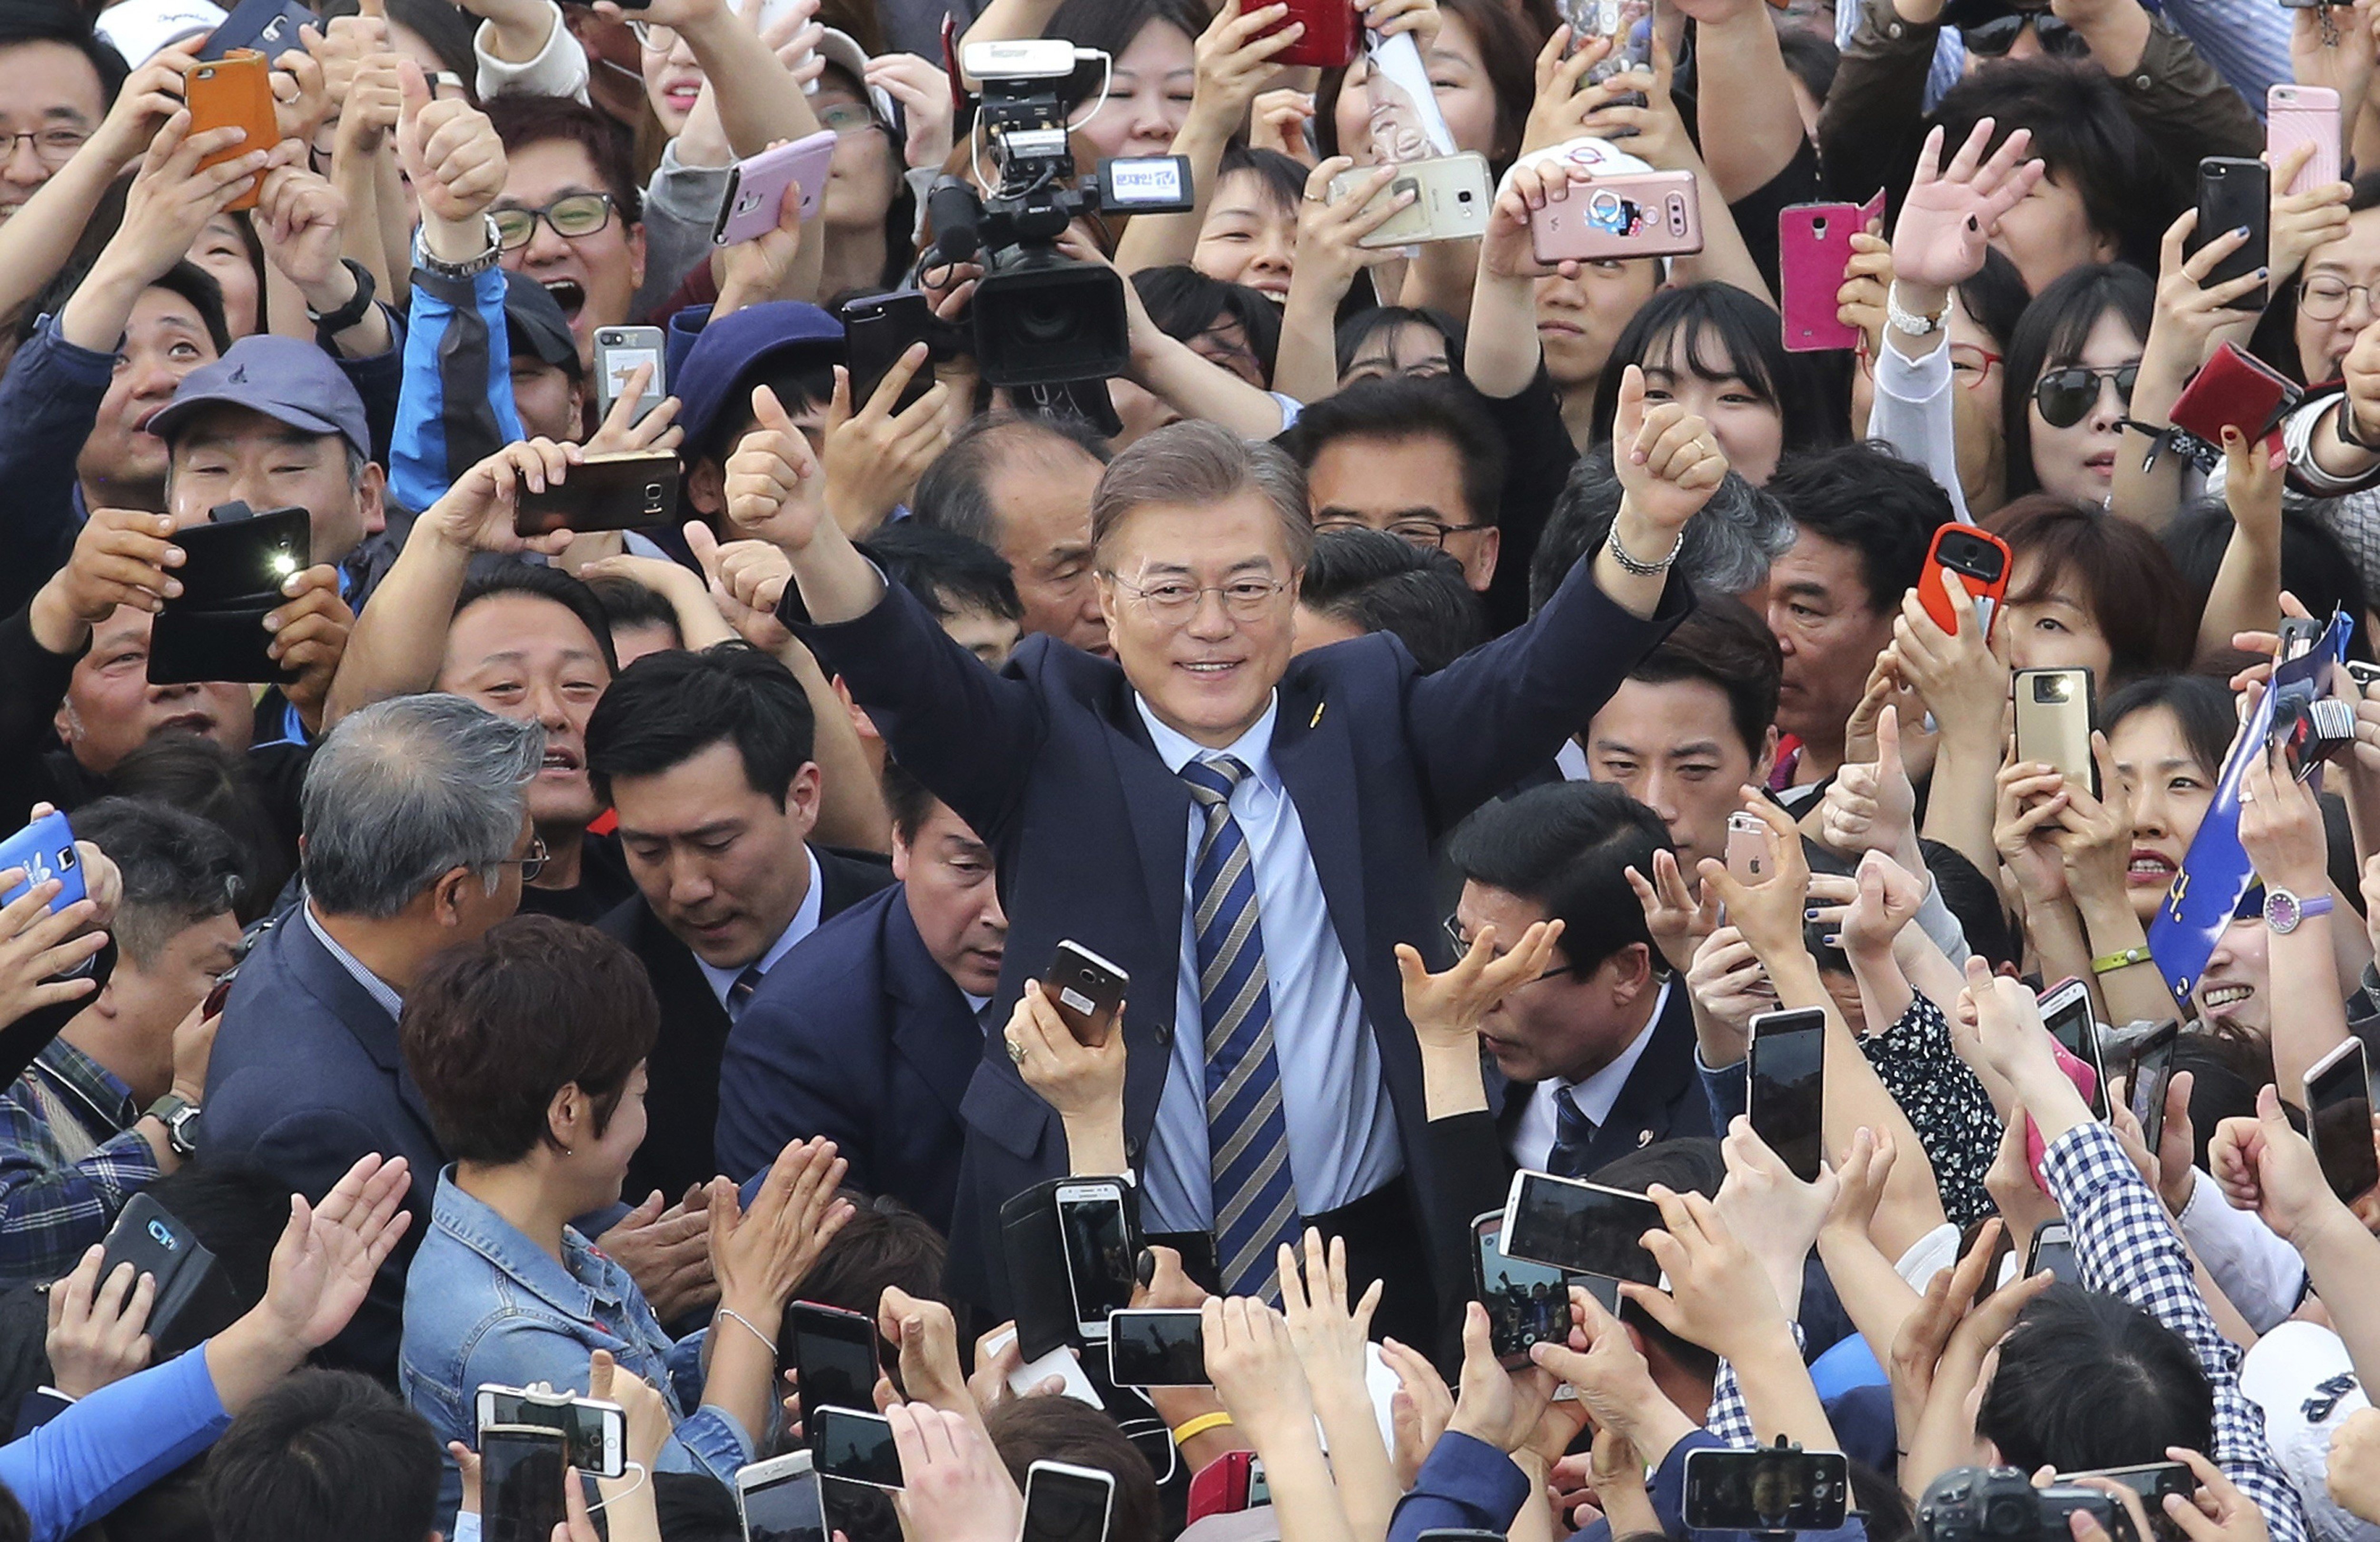 Fawning media coverage has made the South Korean leader more popular than ever, but critics fear there is a dark side to Moon Jae-in – his snuggling up to North Korea